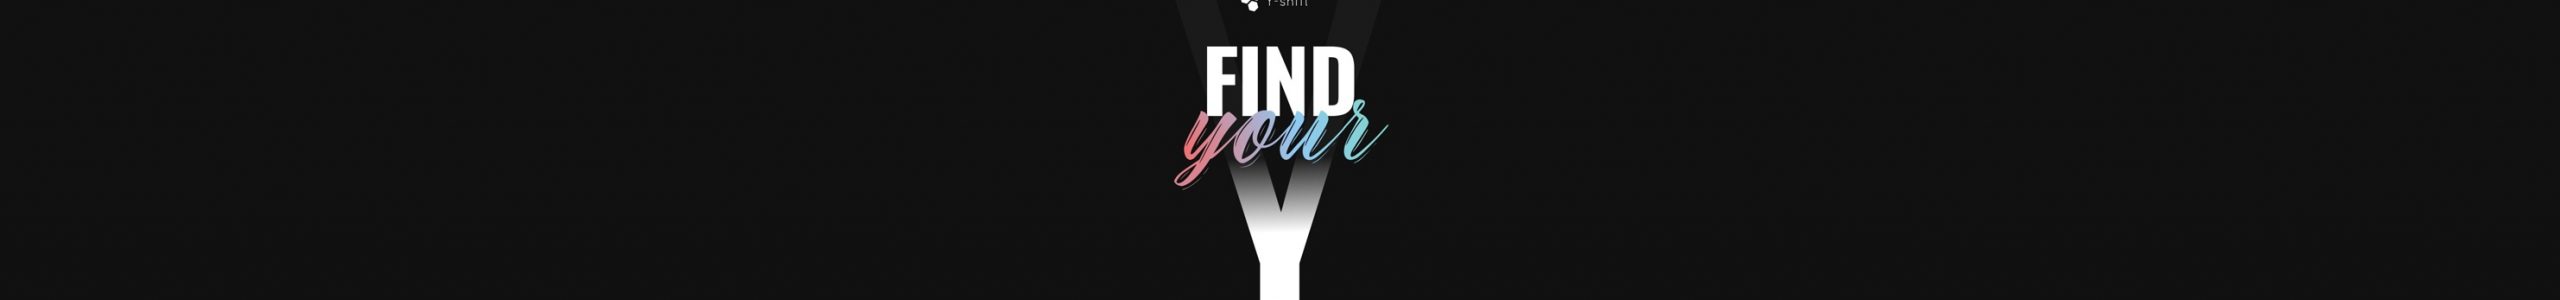 find your y